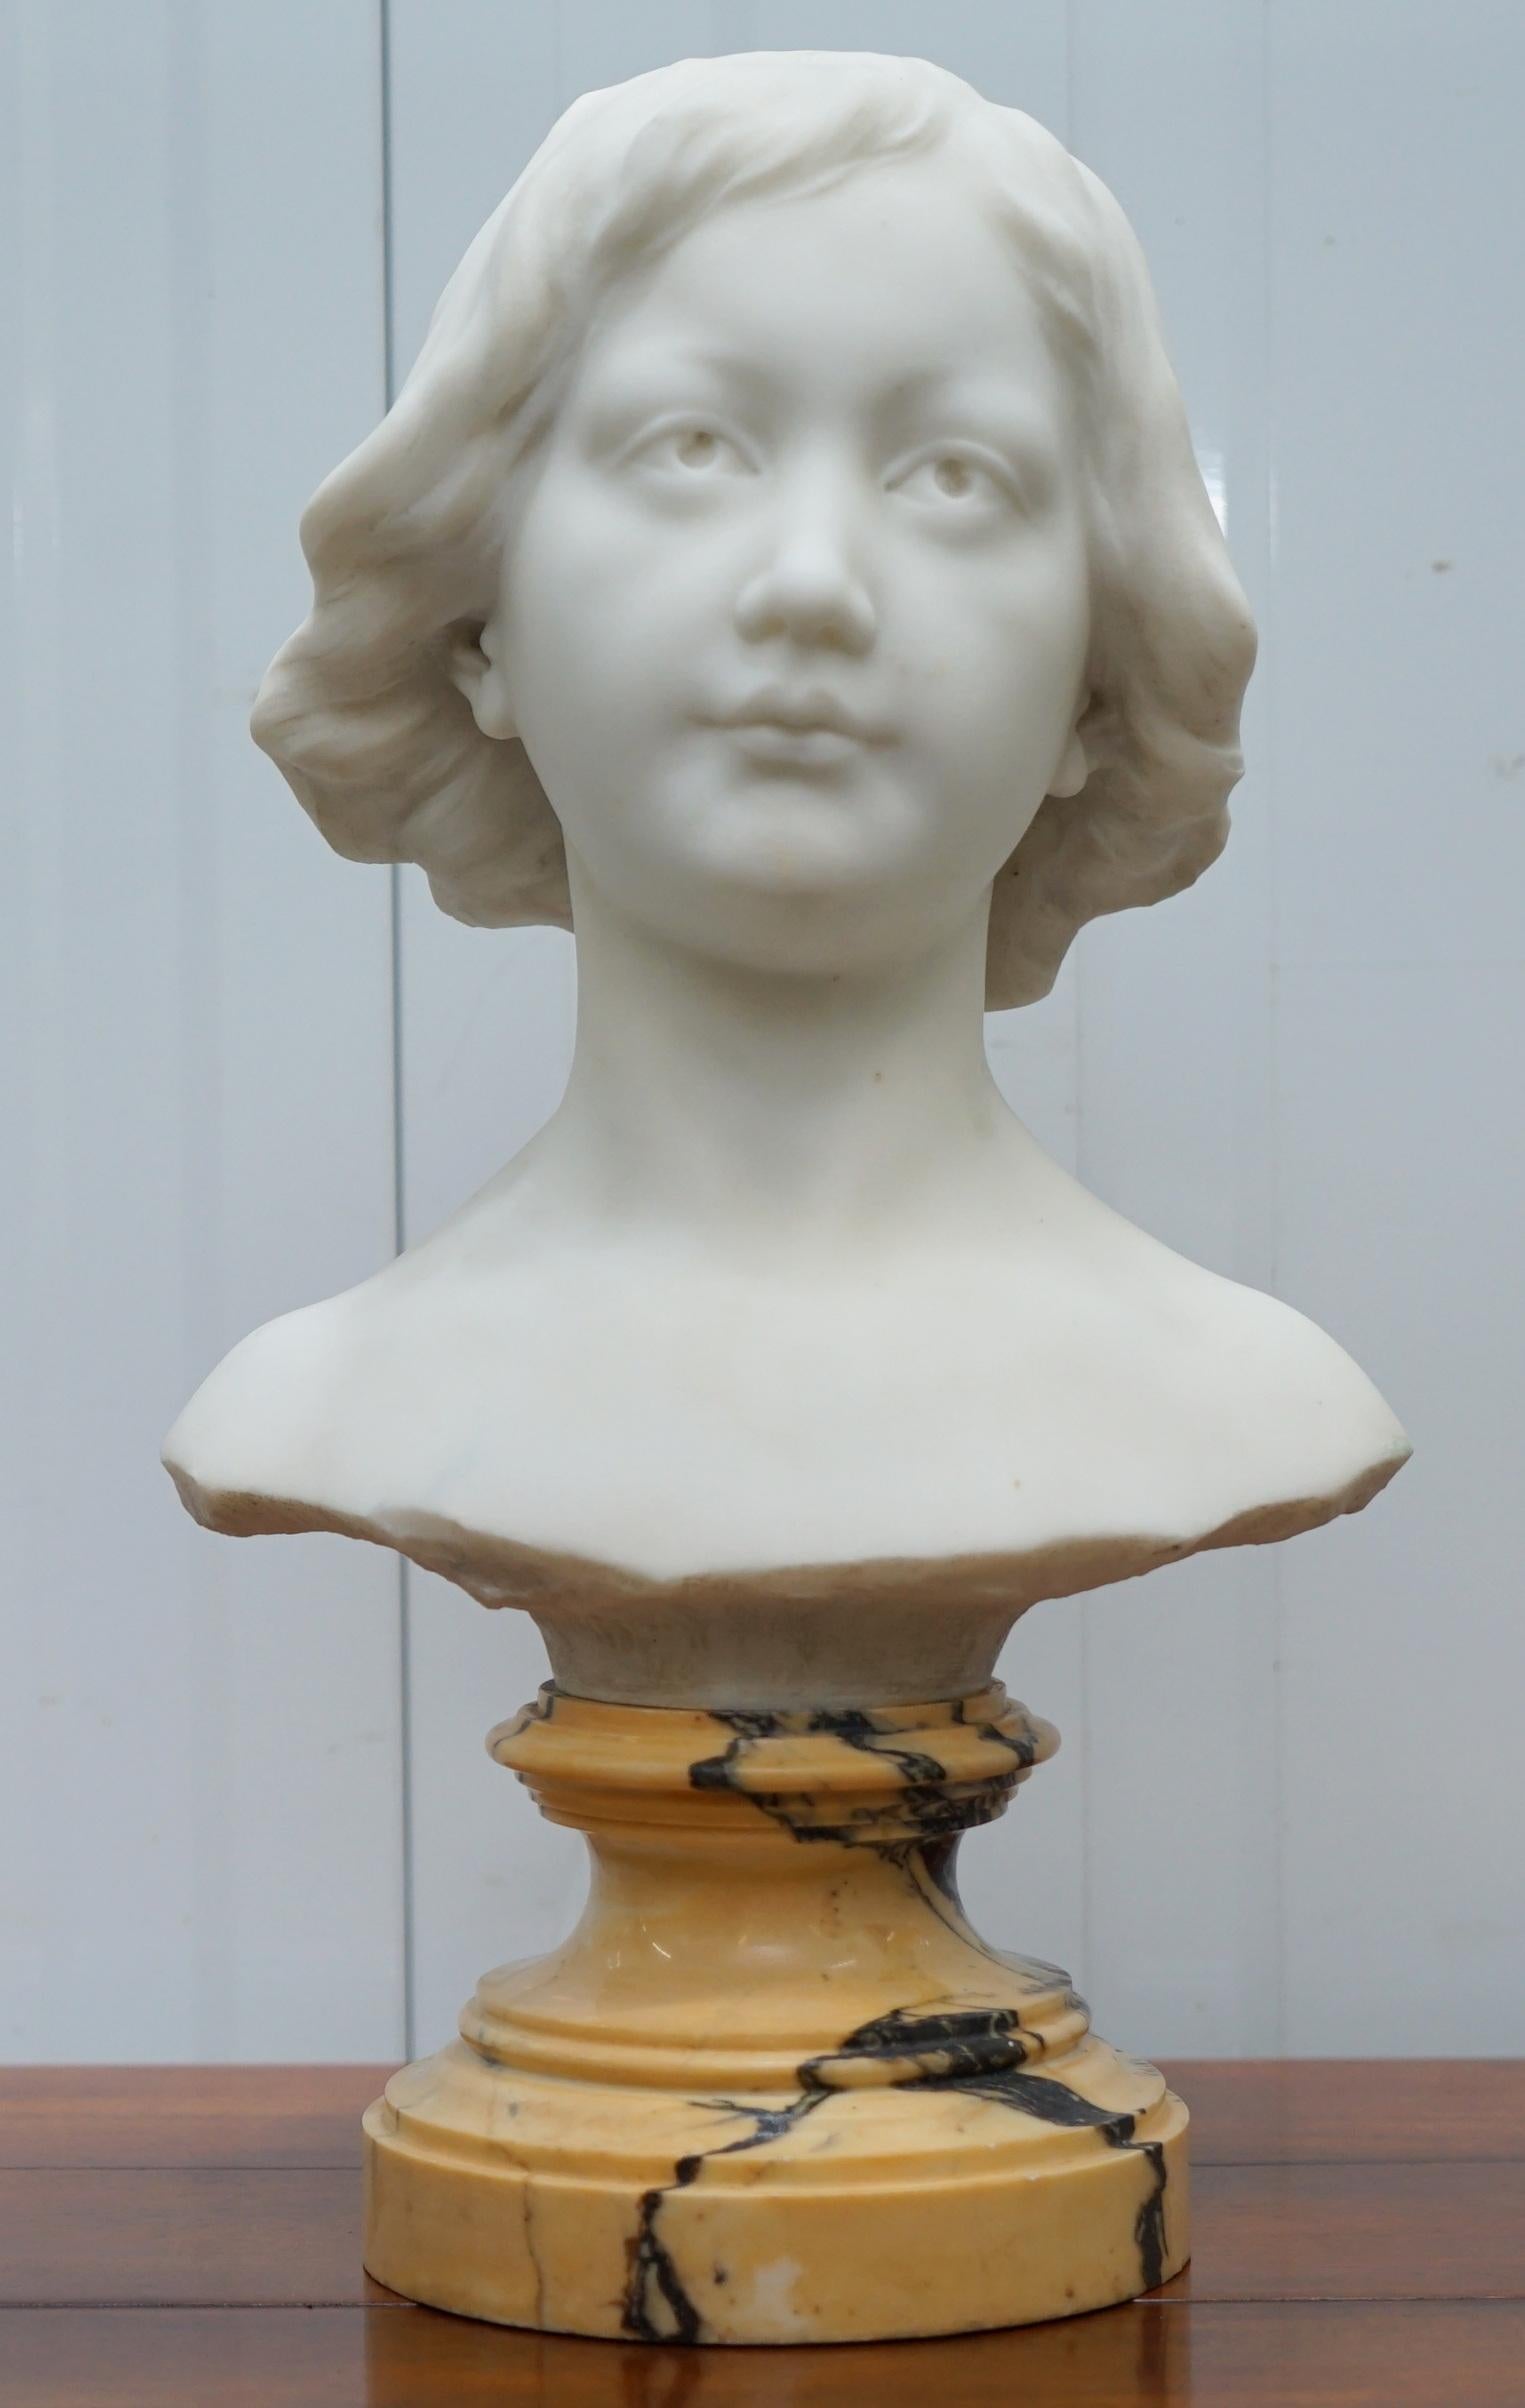 We are delighted to offer for sale this rare and quite exquisite original 19th century Napoleon III French bust of a stunning young lady signed to the rear.

A truly stunning sculpture, the look and feel is sublime, this young lady has a look of